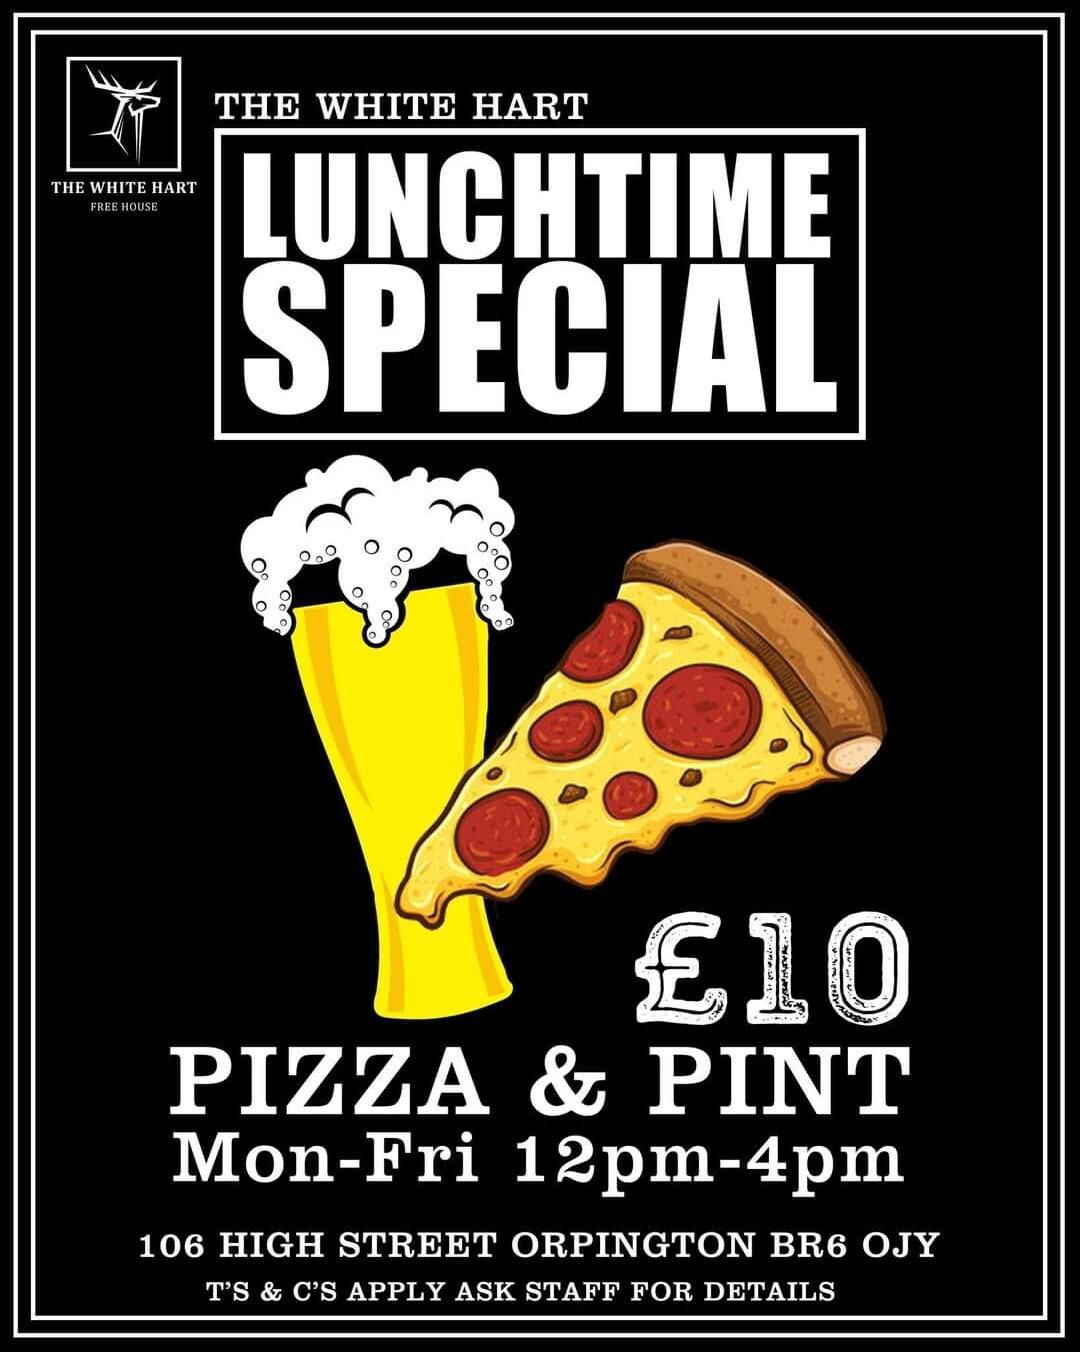 Lunchtime special at The White Hart